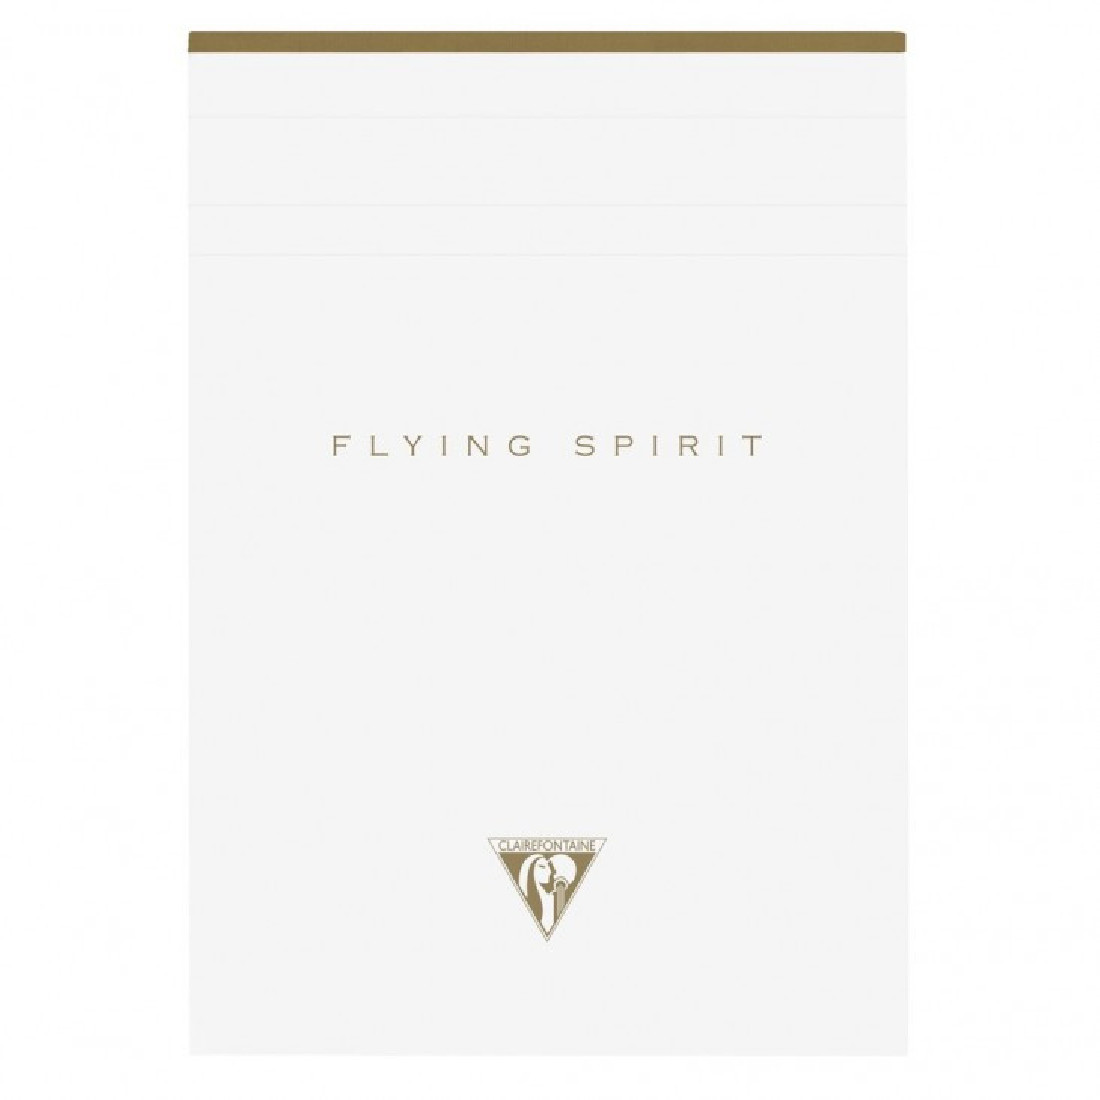 Clairefontaine Rhodia notepad A5 21x14,8cm, Flying spirit, 140 pages, Lined, ivoire paper 90gr, white craft cover,104636